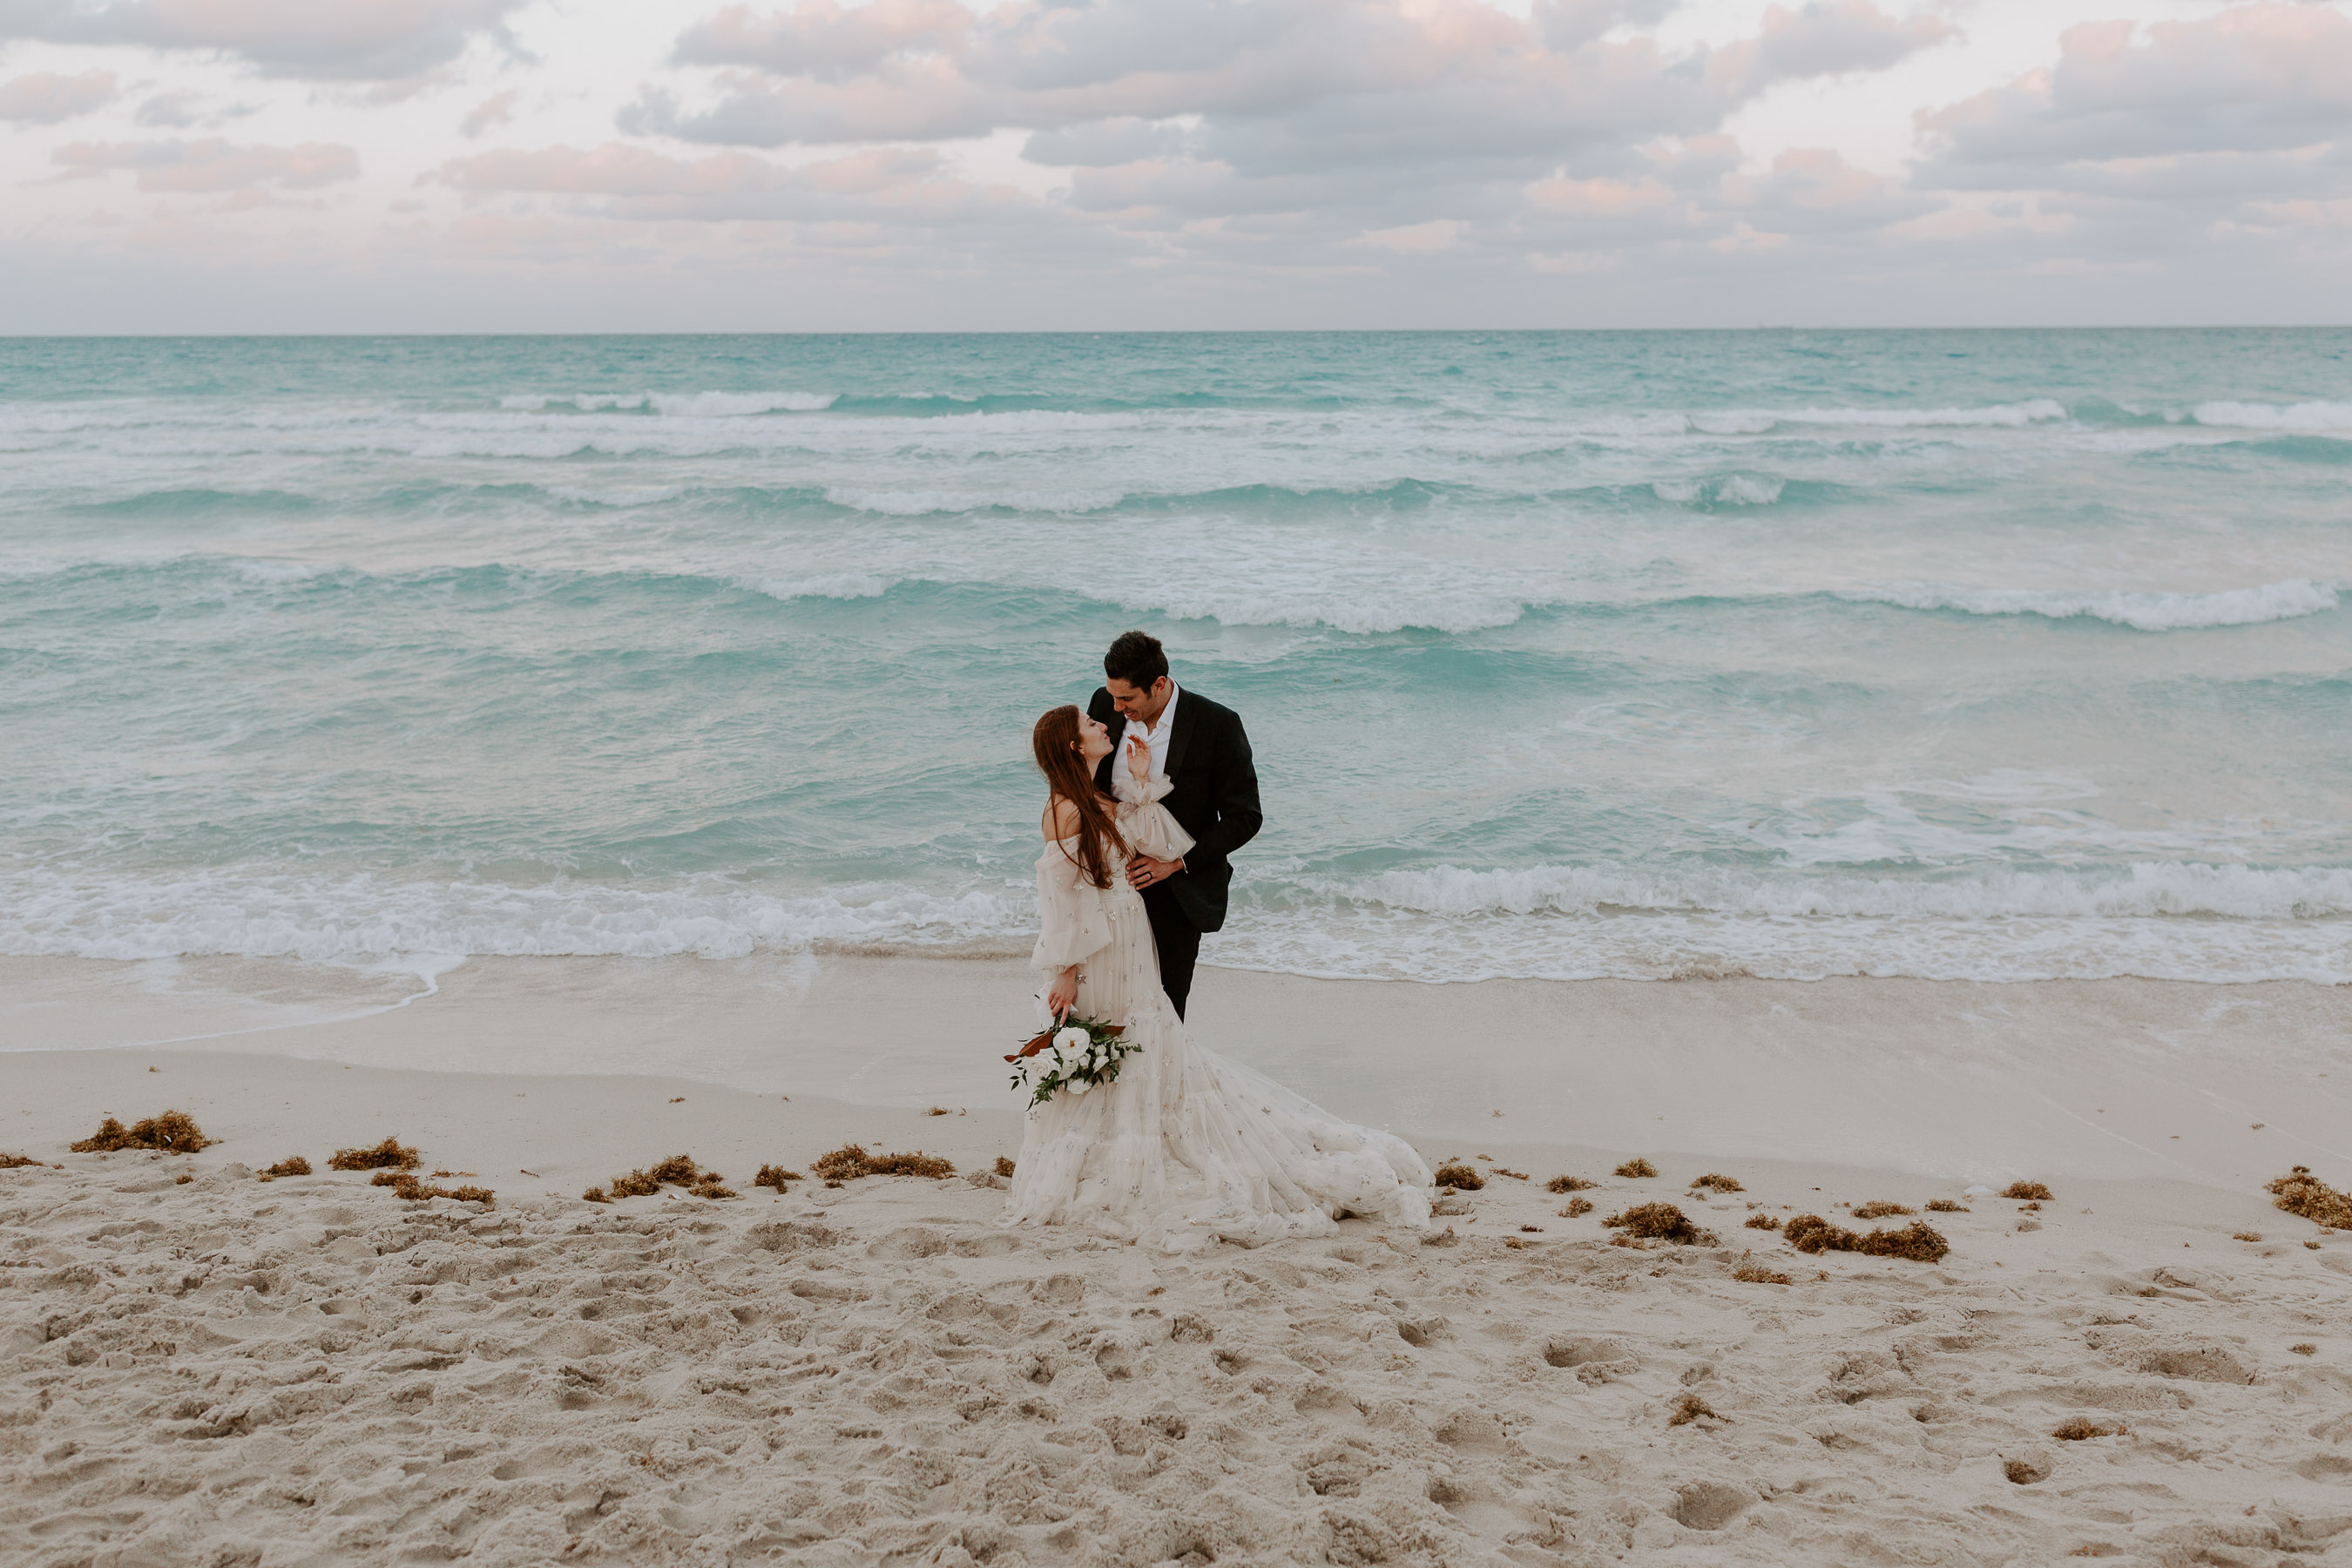 How to plan an Elopement in Miami